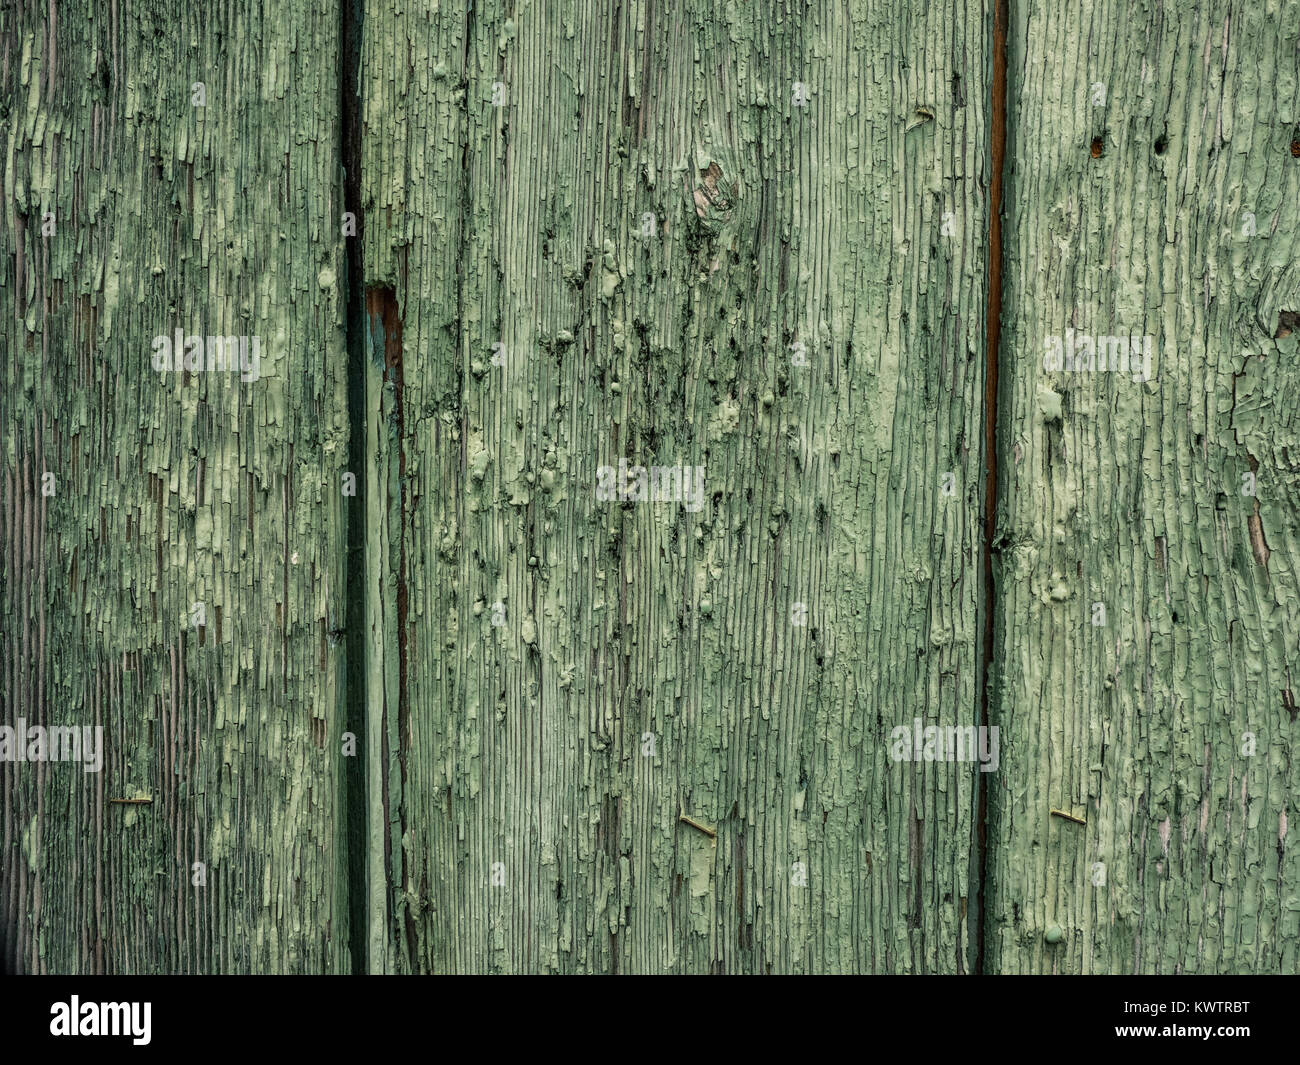 wooden surface with old paint peeling off Stock Photo